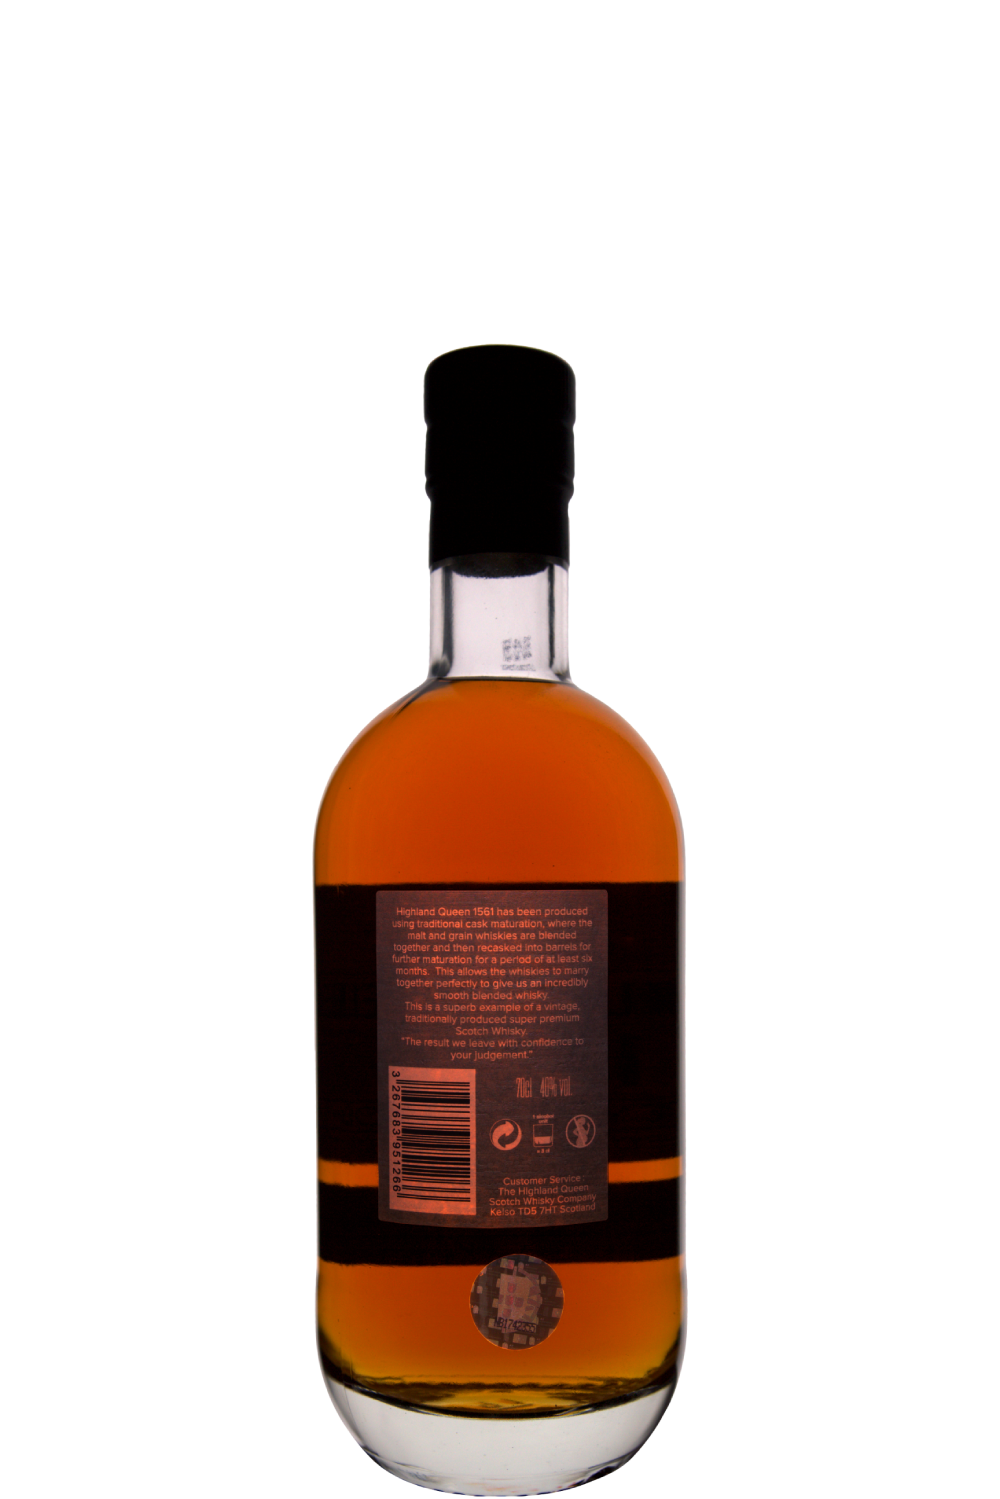 WineVins Whisky Highland Queen 1561 Silver Edition 30 Anos